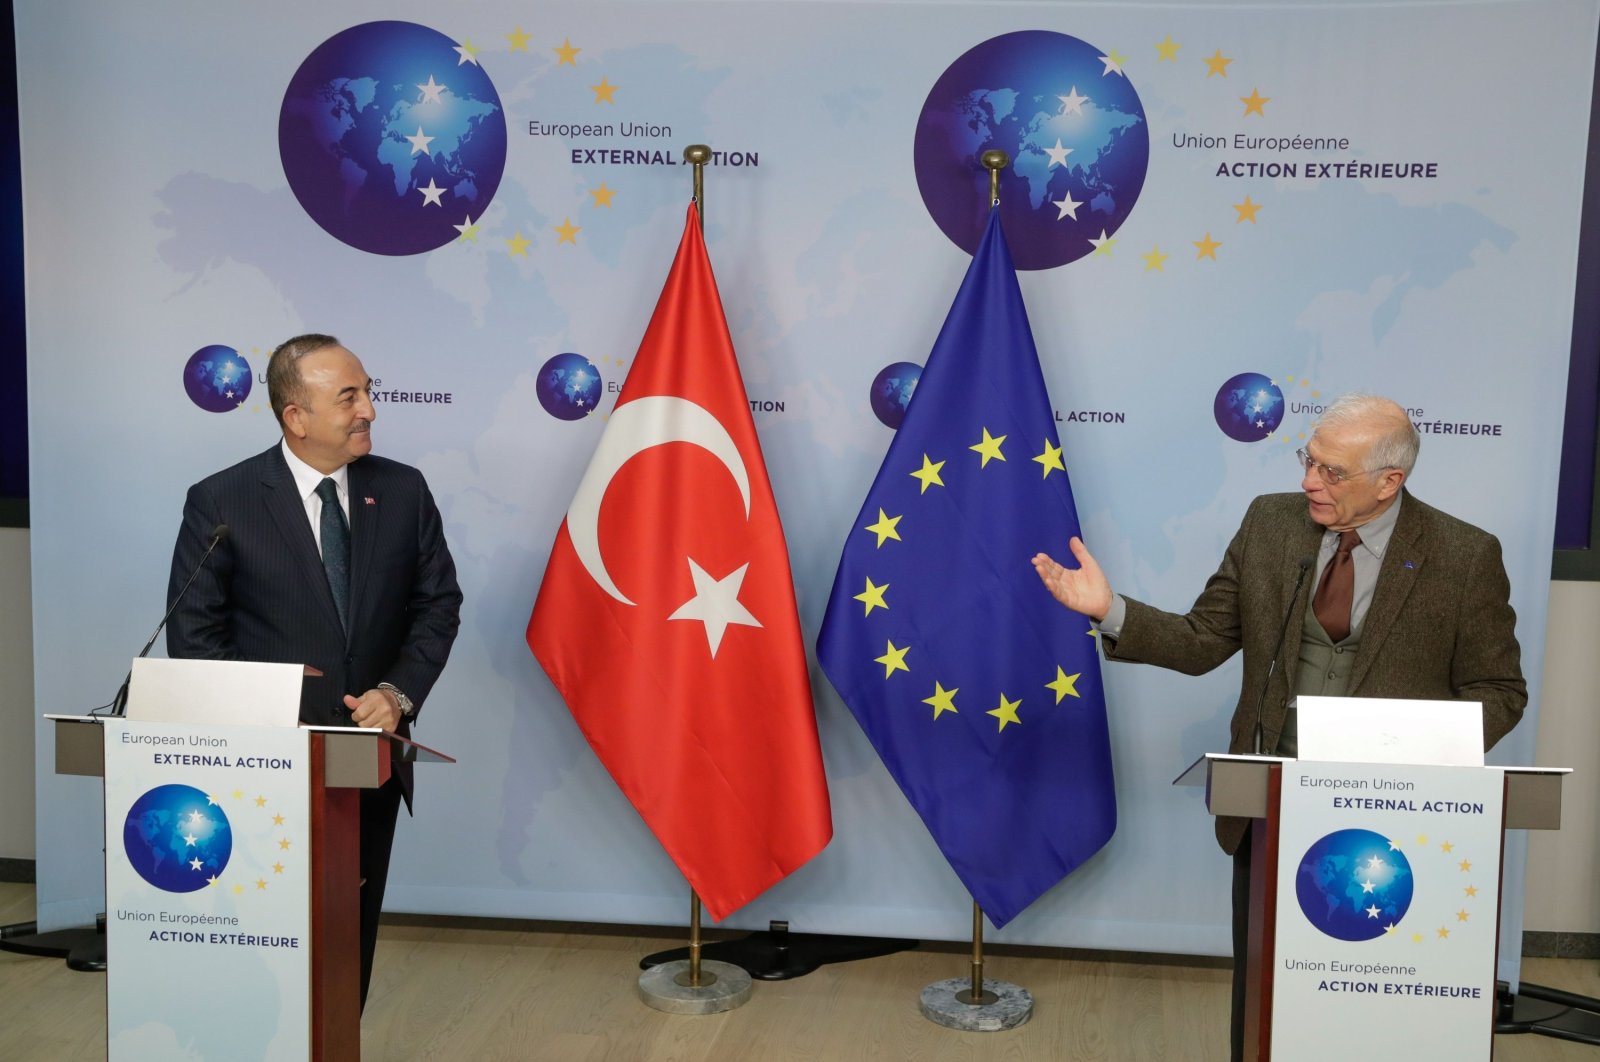 Foreign Minister Mevlüt Çavuşoğlu (L) and High Representative of the European Union for Foreign Affairs and Security Policy Josep Borrell give a joint statement ahead of a meeting at the EEAS in Brussels, Belgium, Jan. 21, 2021. (AFP Photo)